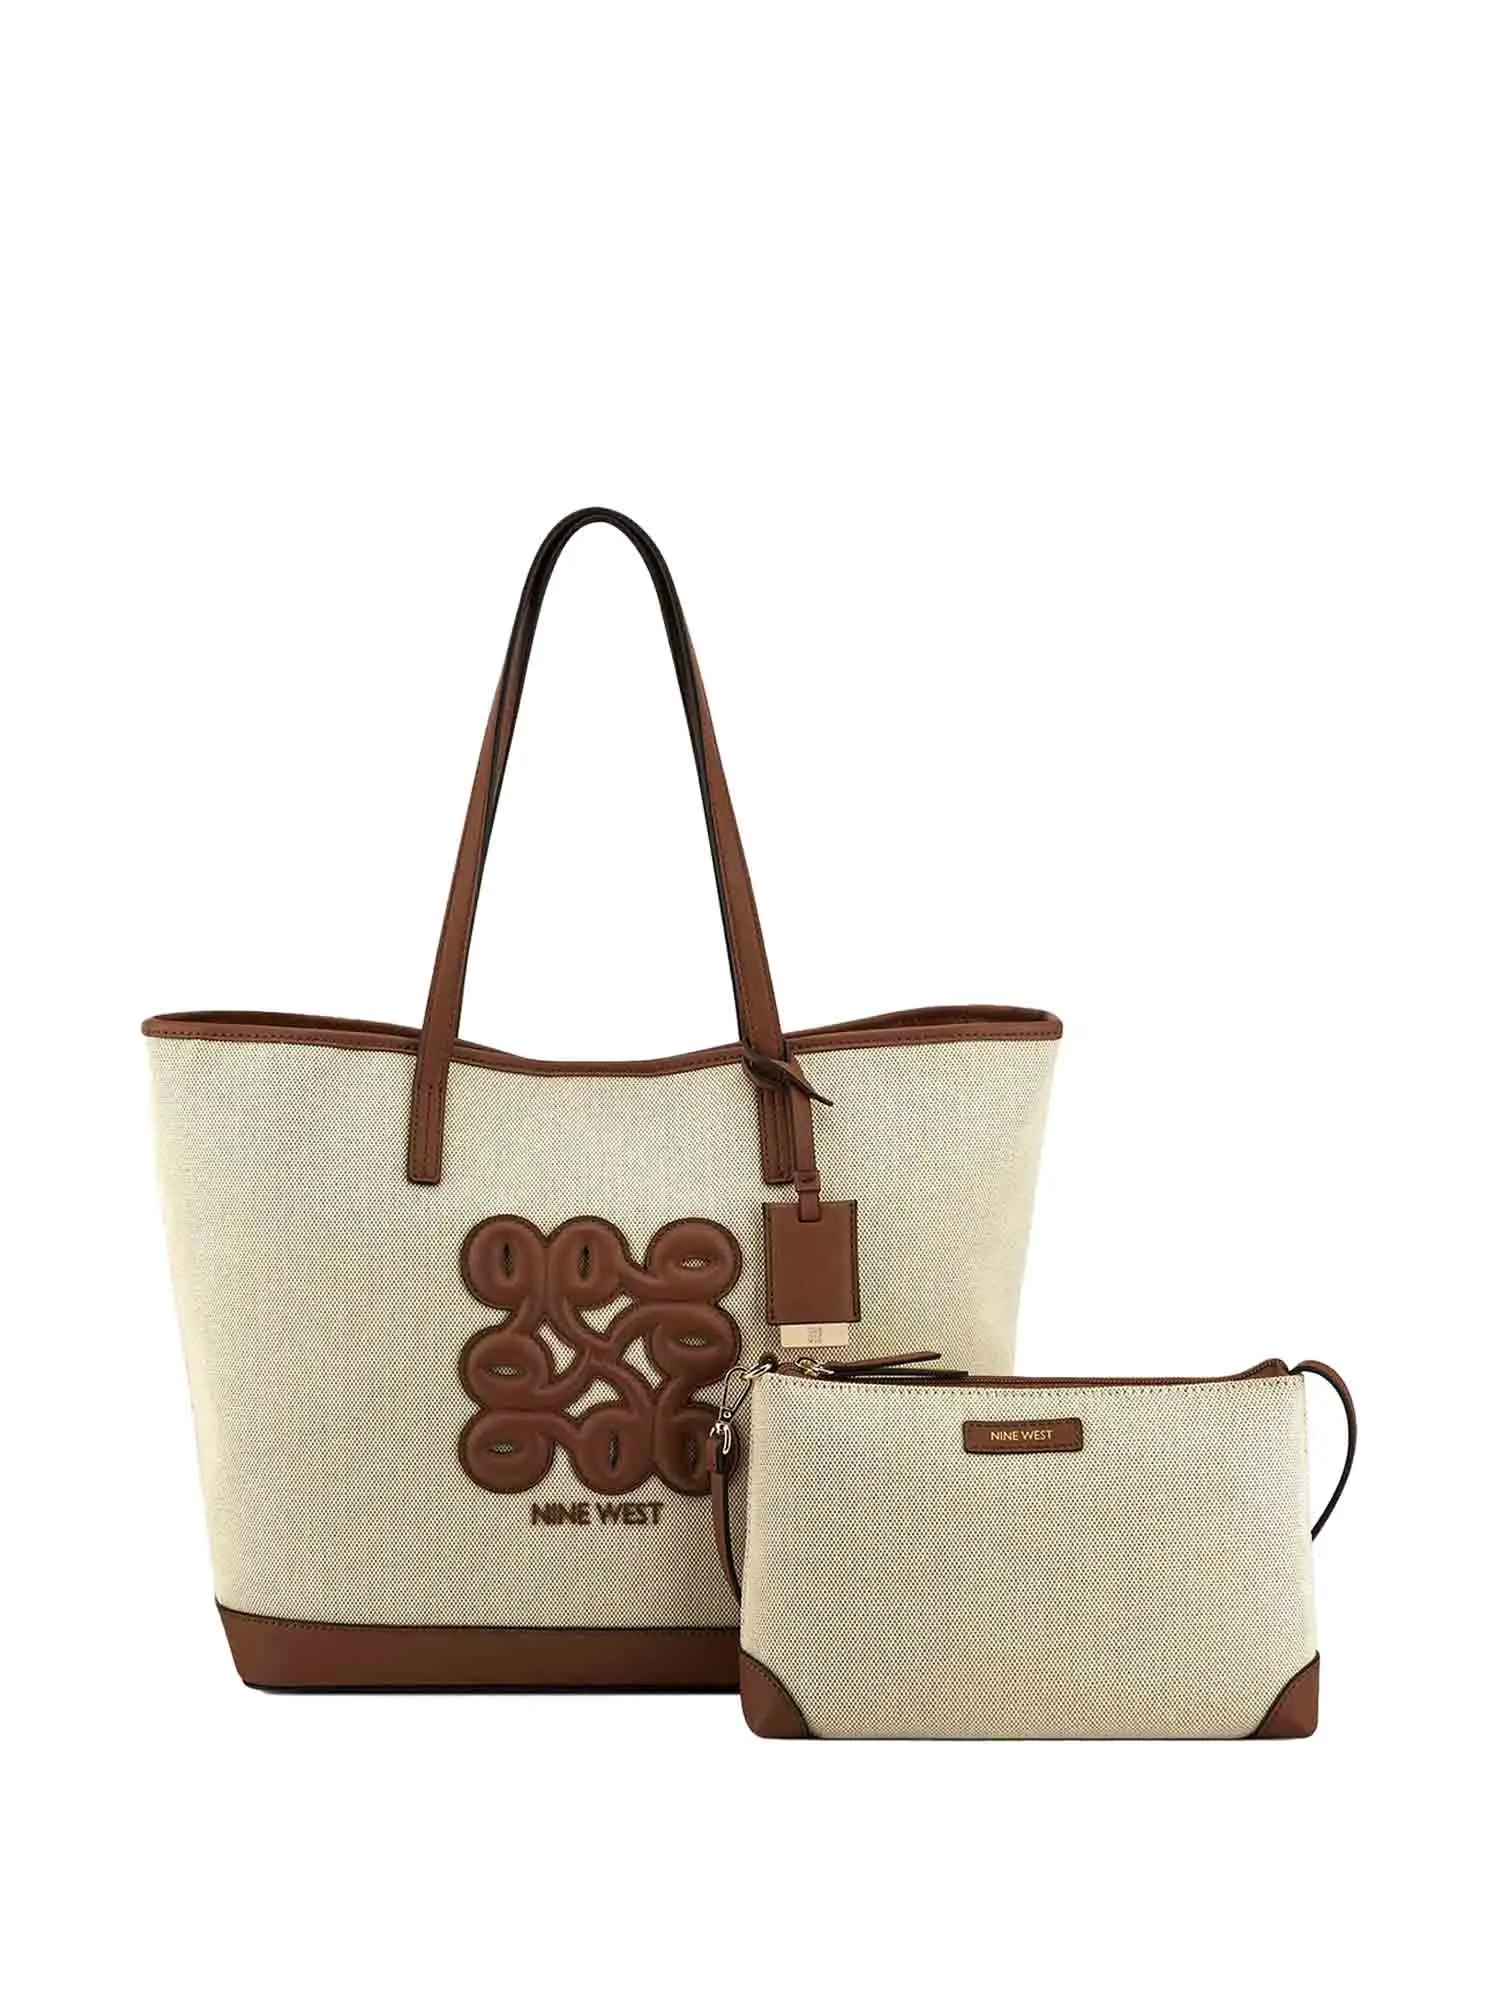 TOTE DONNA - NINE WEST - 101510608 N59 - NATURALE, UNICA